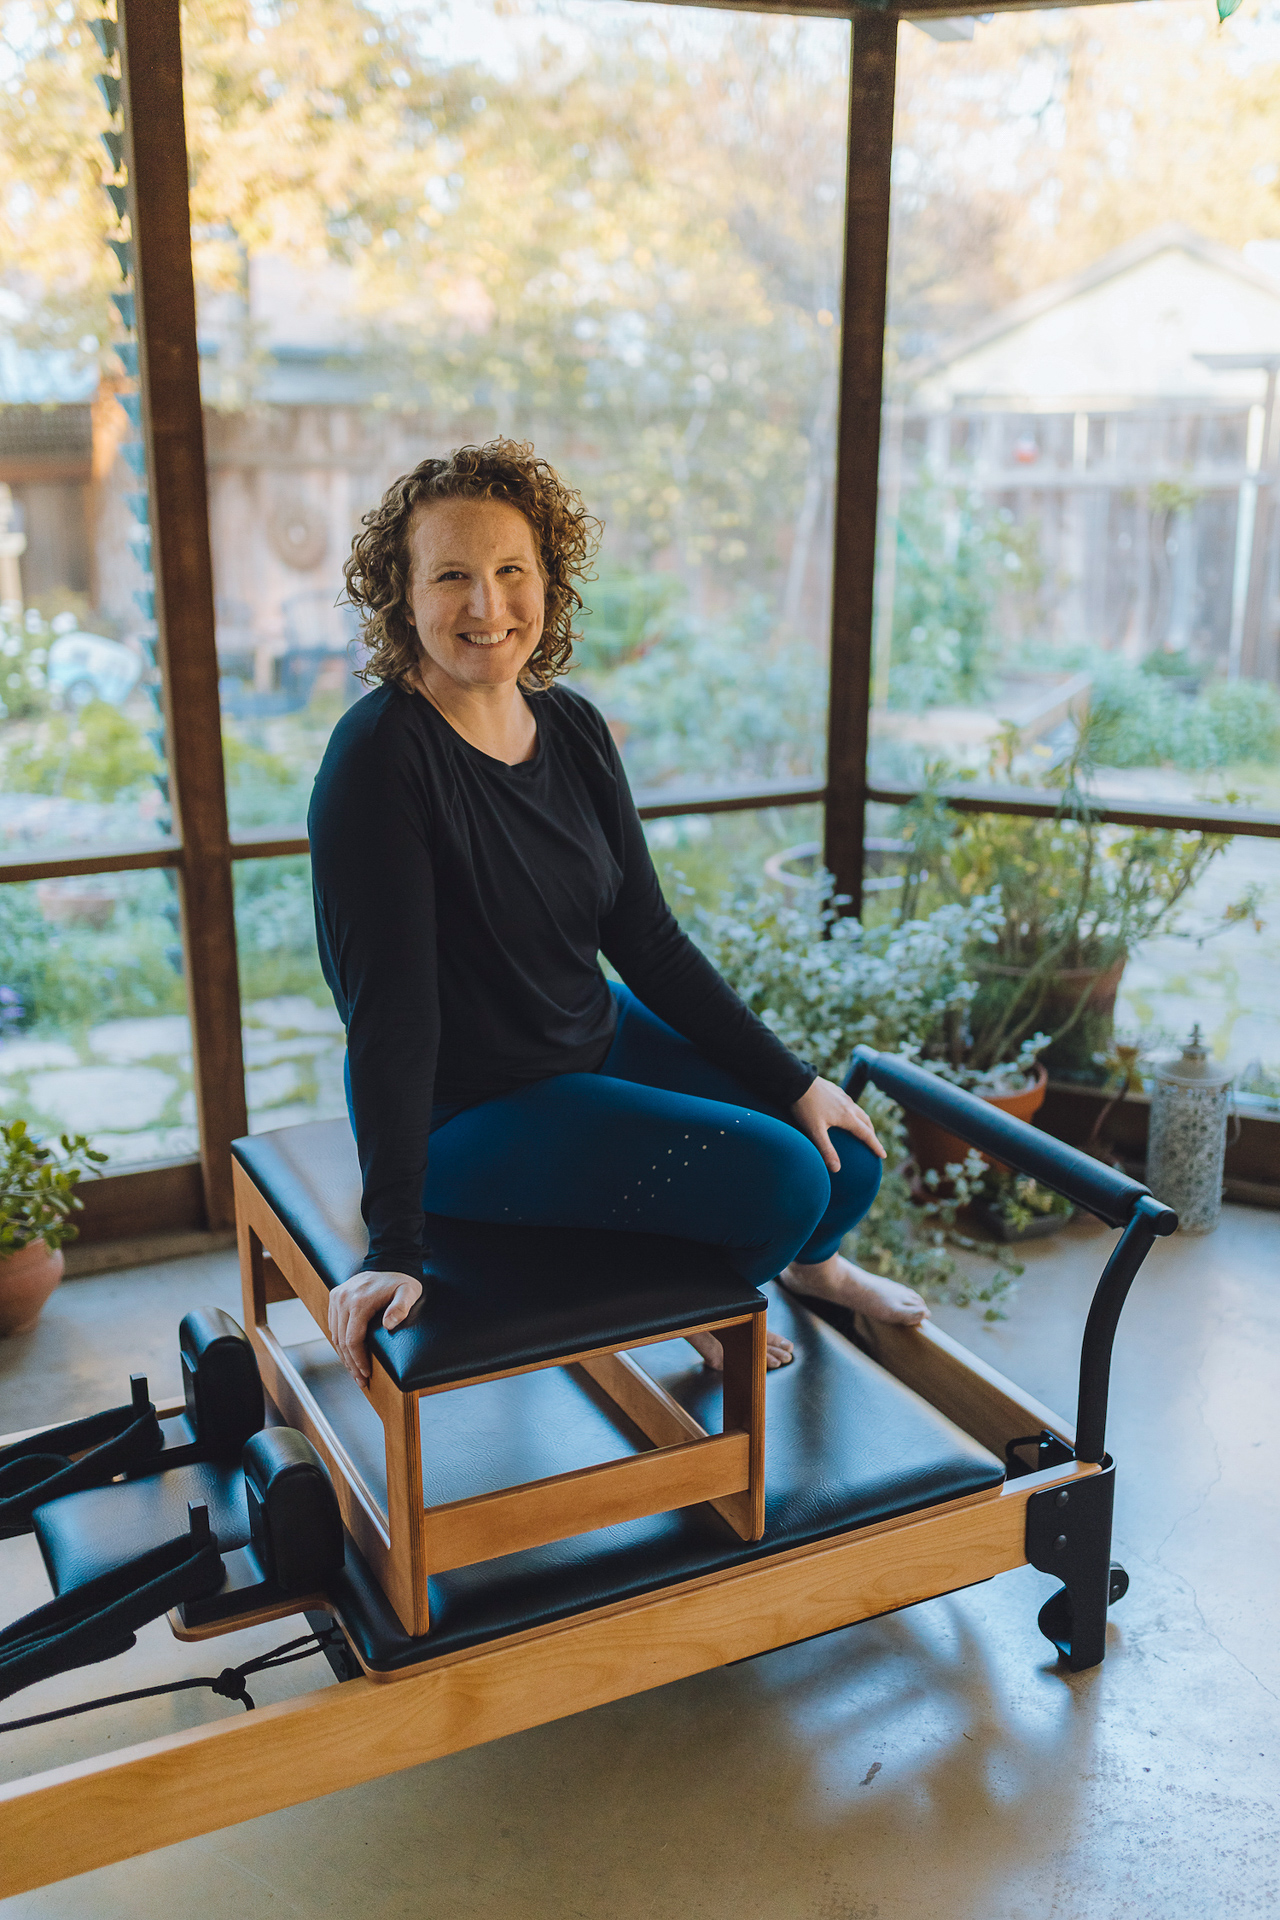 Kaleen Canevari, a mechanical engineer-turned-Pilates instructor, sits on the Flexia exercise machine she invented.